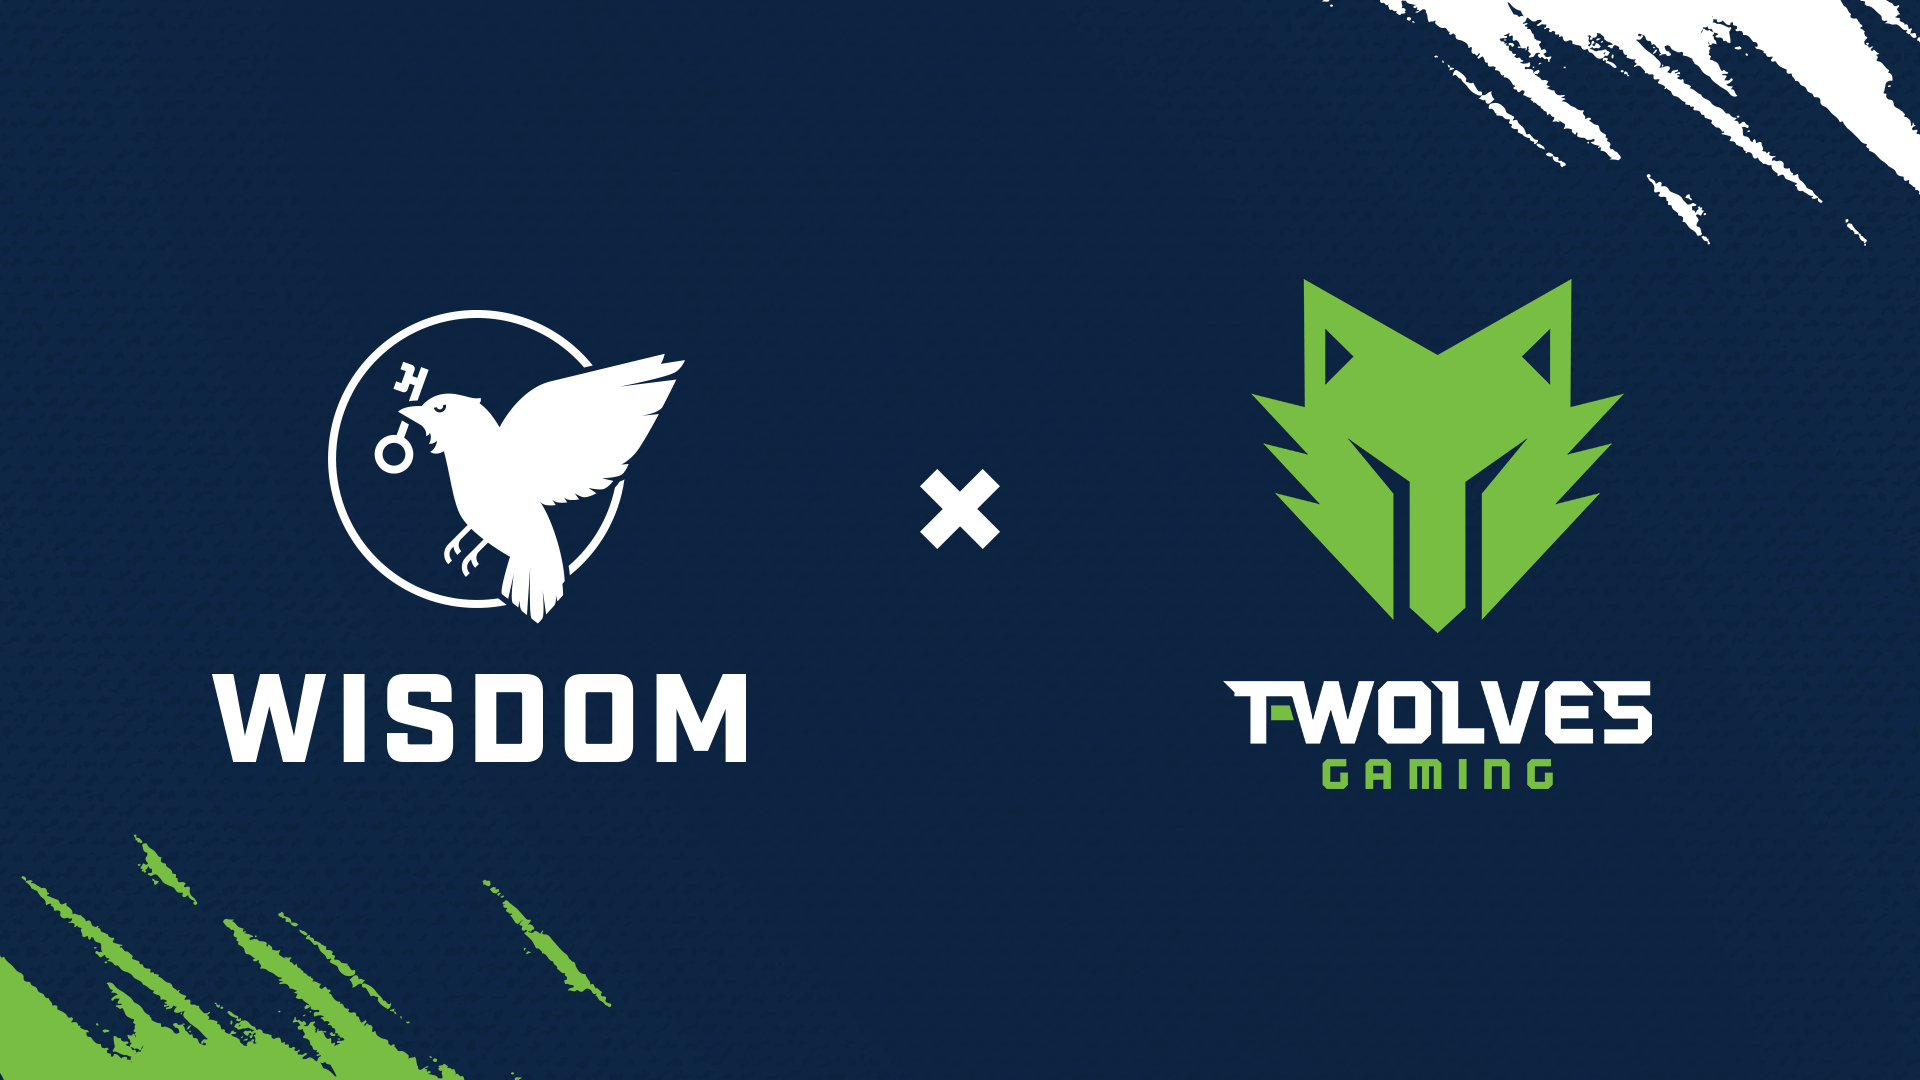 Wisdom Gaming Studios partners with TWolves Gaming